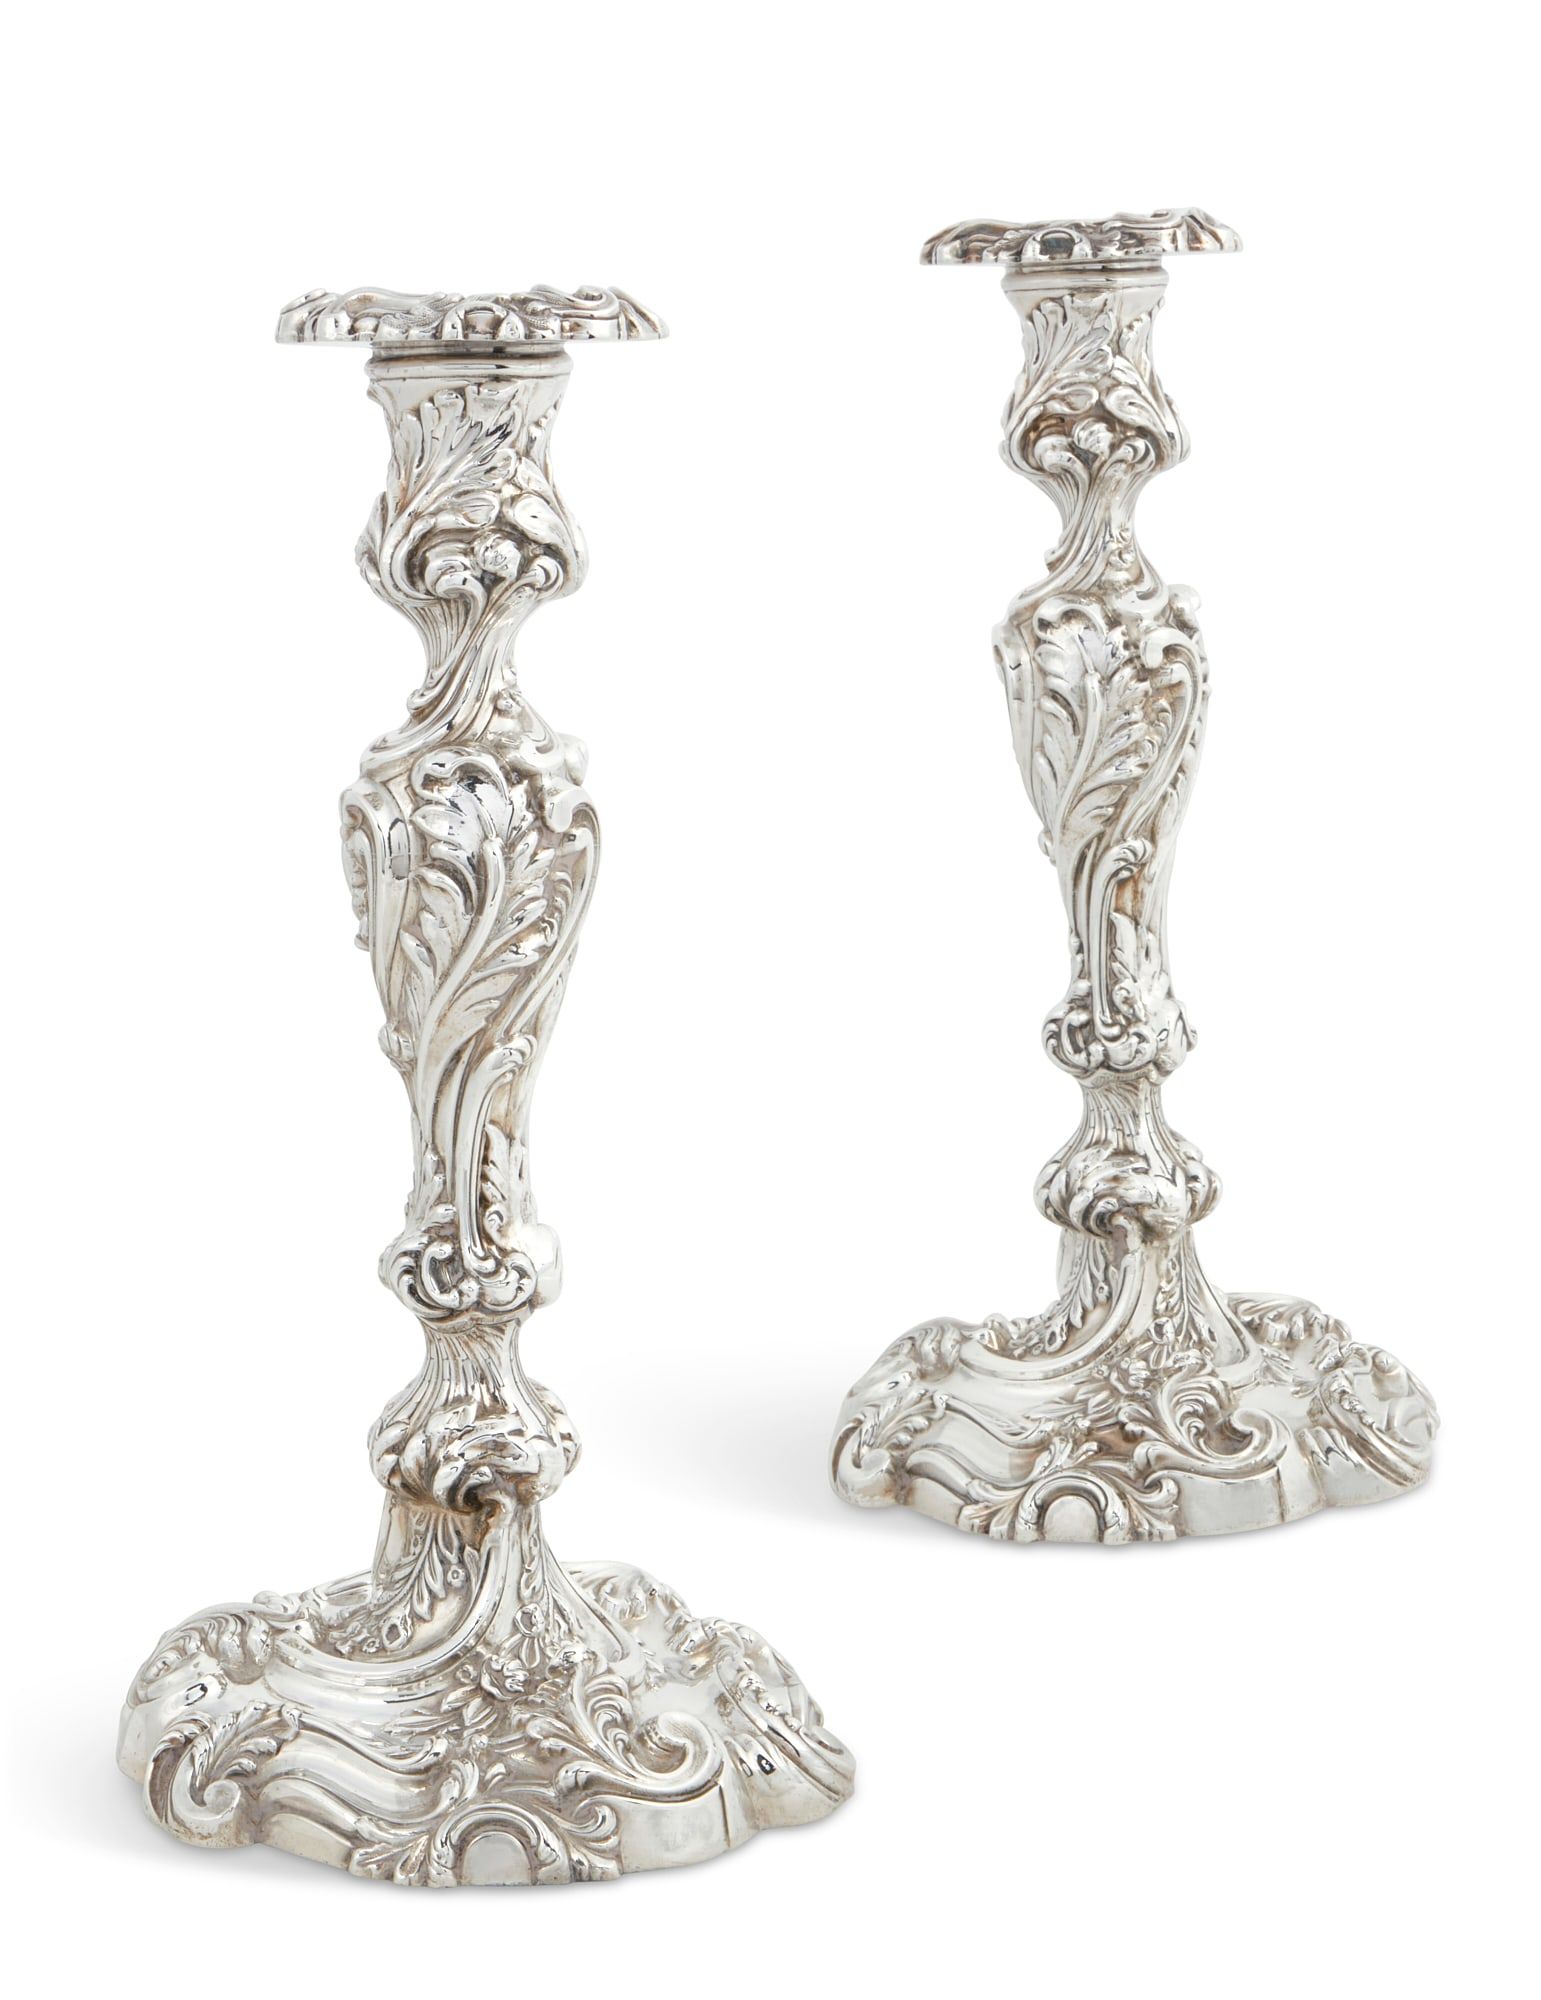 A PAIR OF VICTORIAN WEIGHTED CANDLESTICKSA 2fb3c99